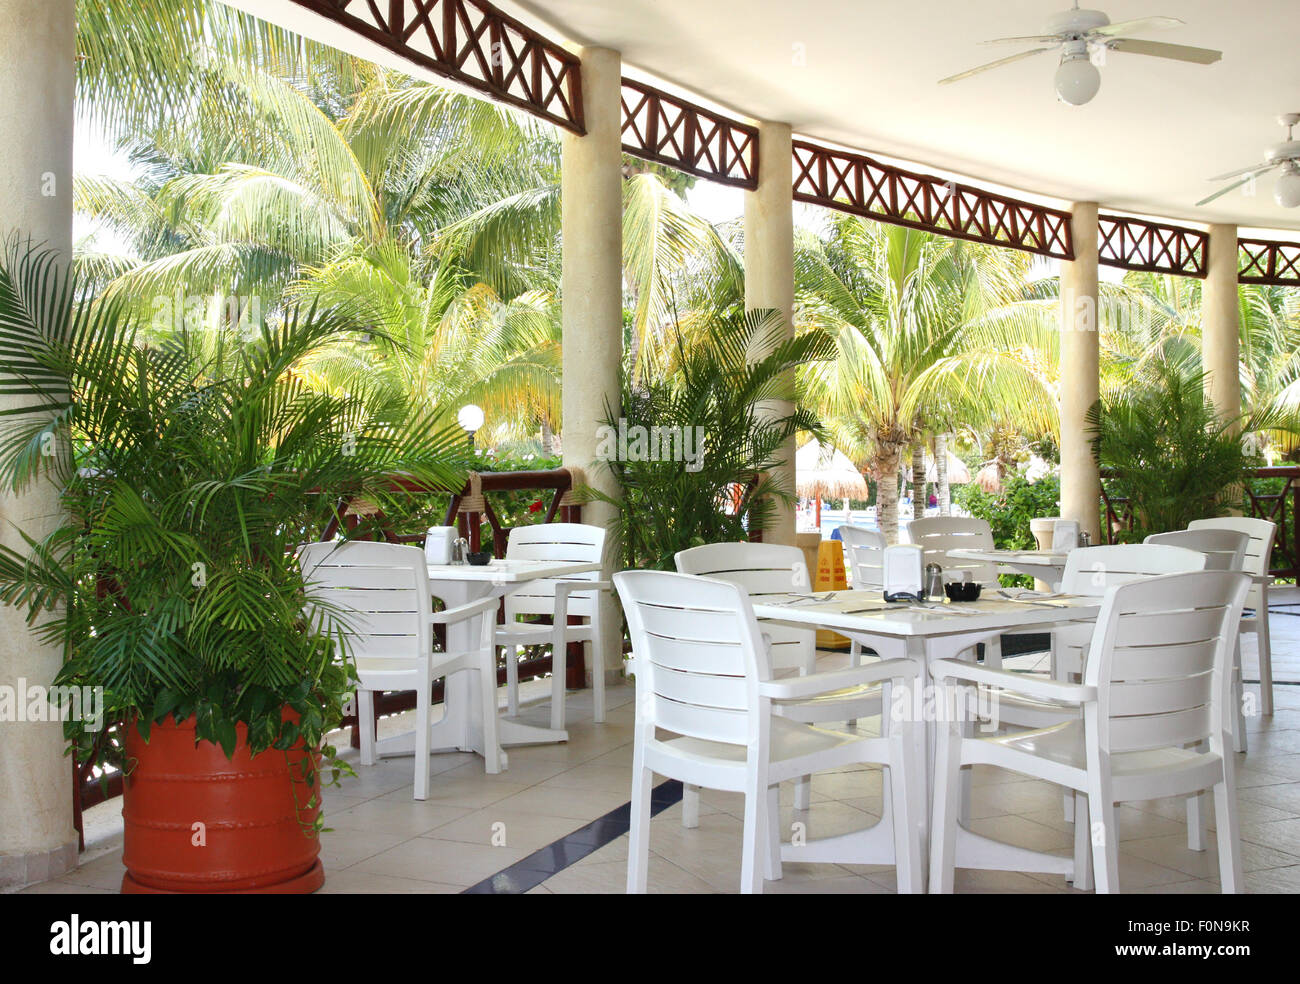 Outdoor cafe in tropical resort Stock Photo